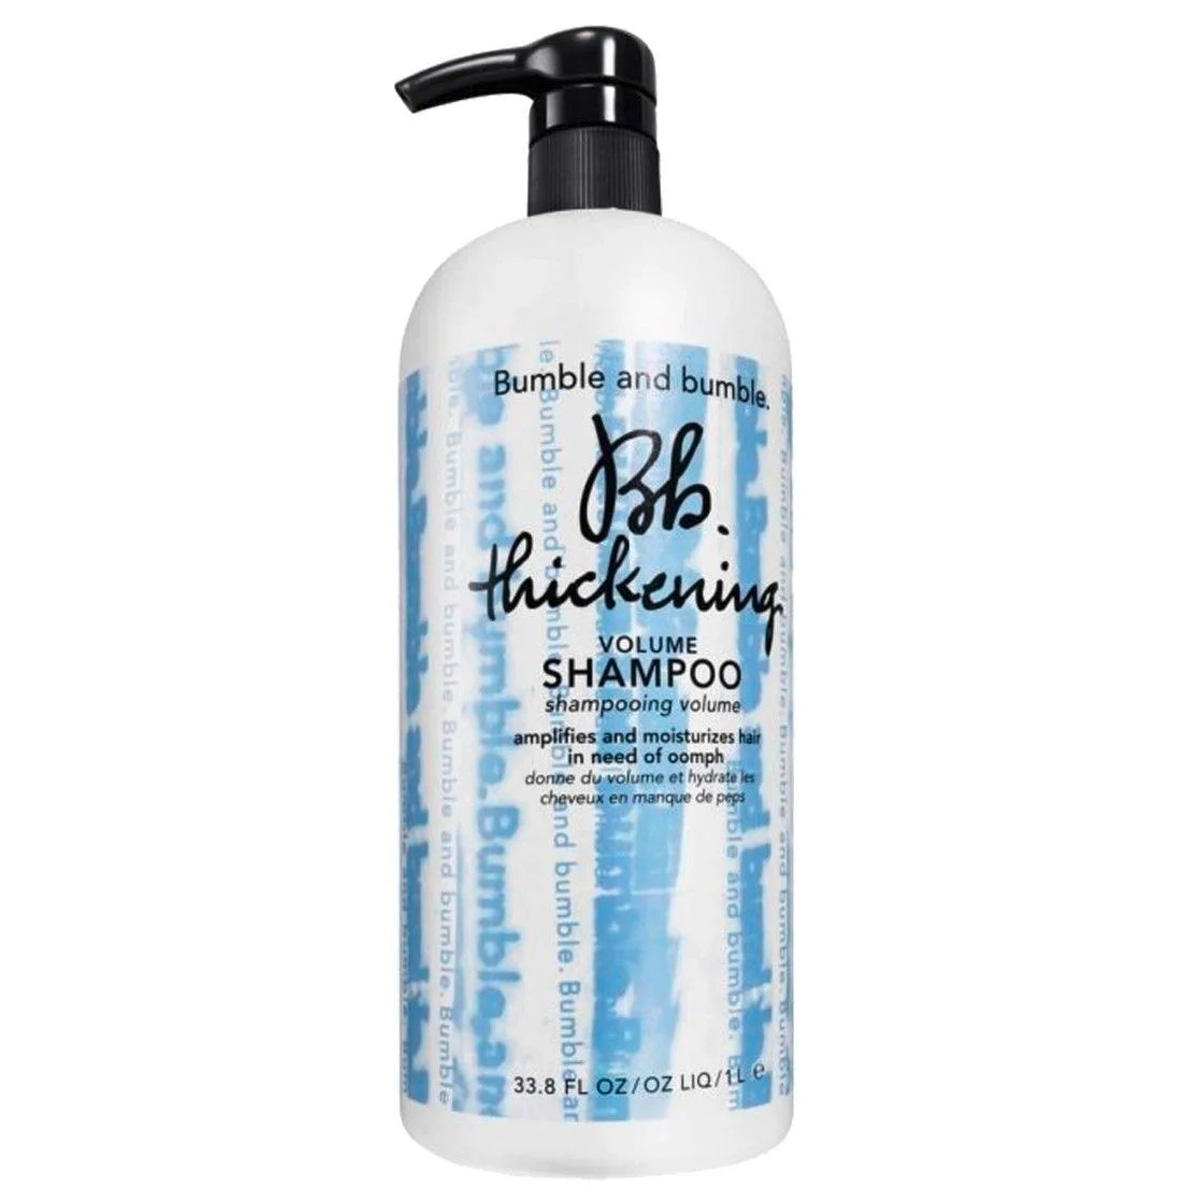 Bumble and bumble Thickening Shampoo 1 Liter - 1